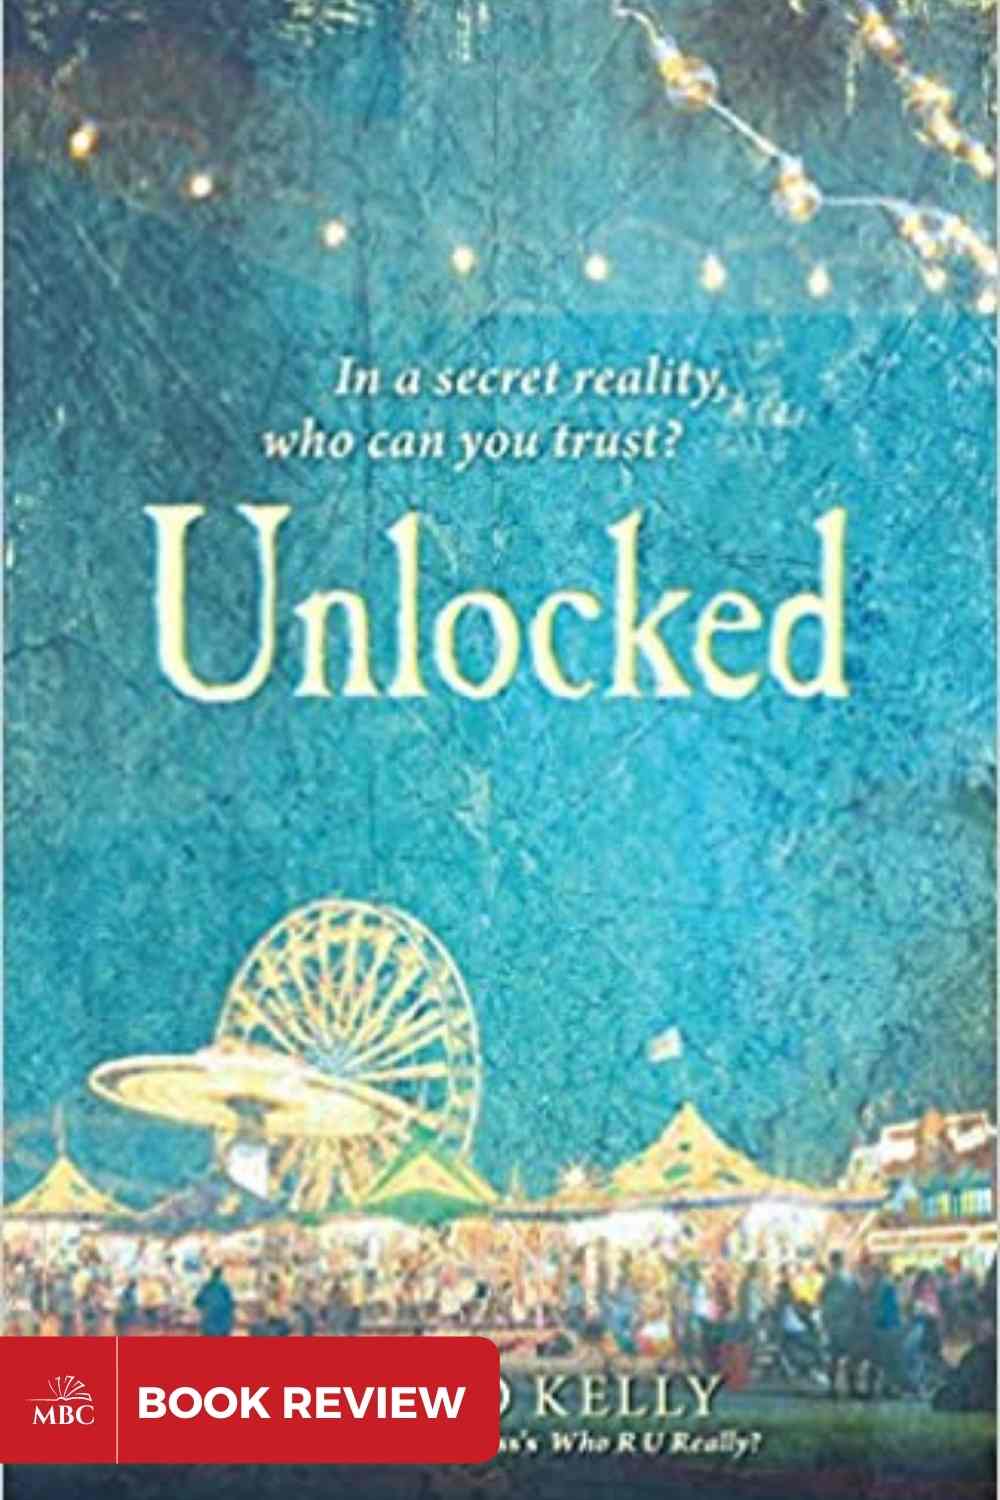 BOOK REVIEW: Unlocked